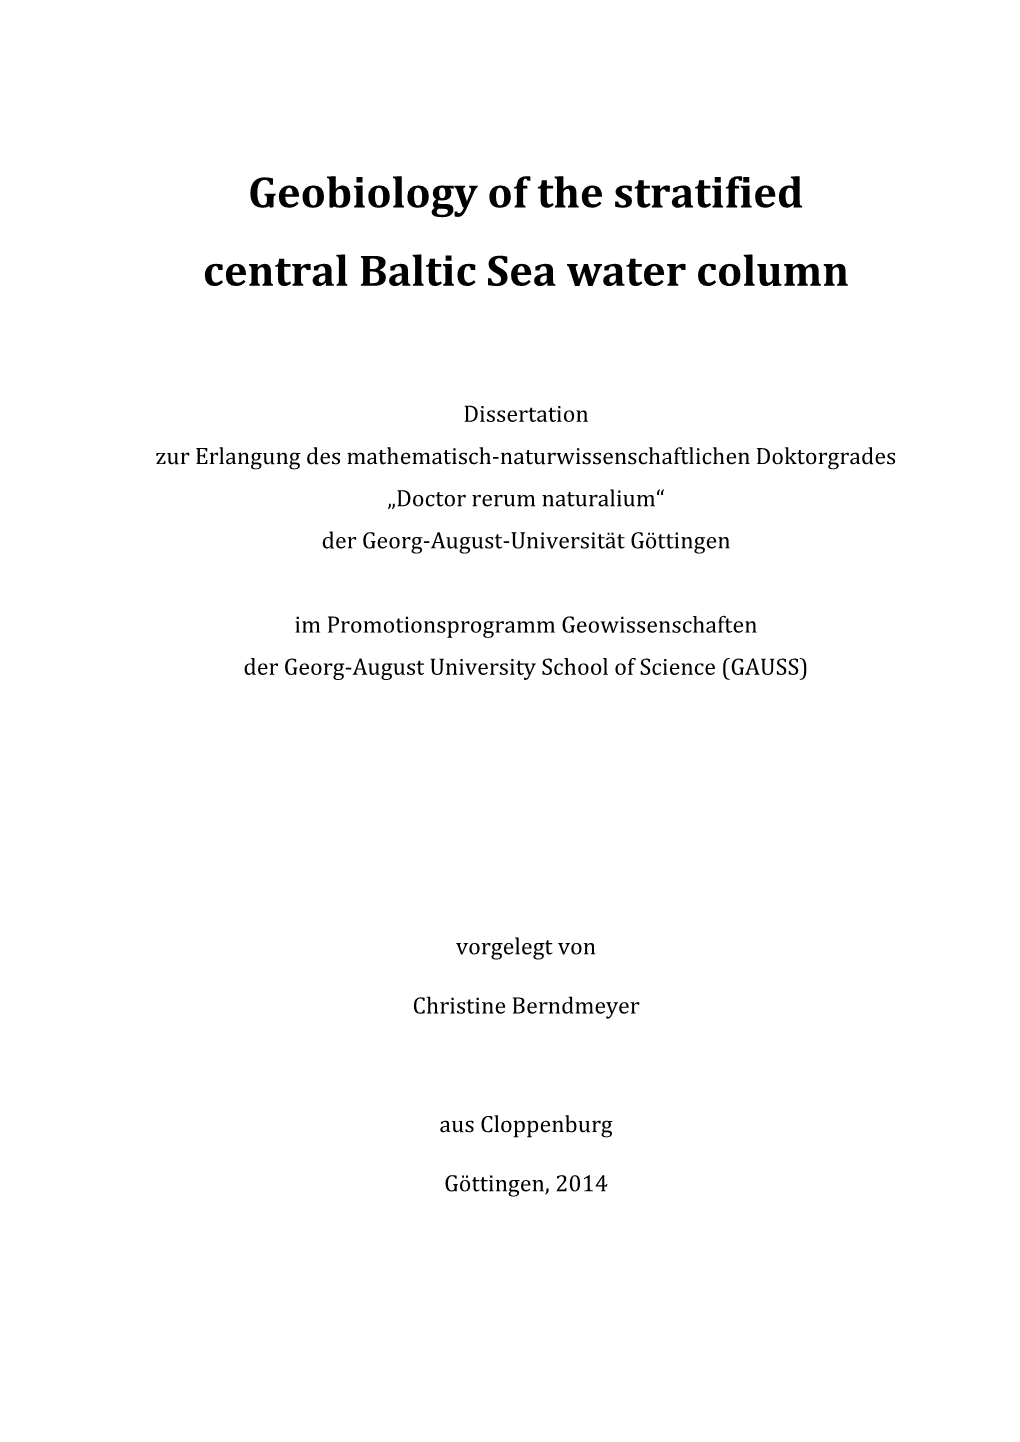 Geobiology of the Stratified Central Baltic Sea Water Column